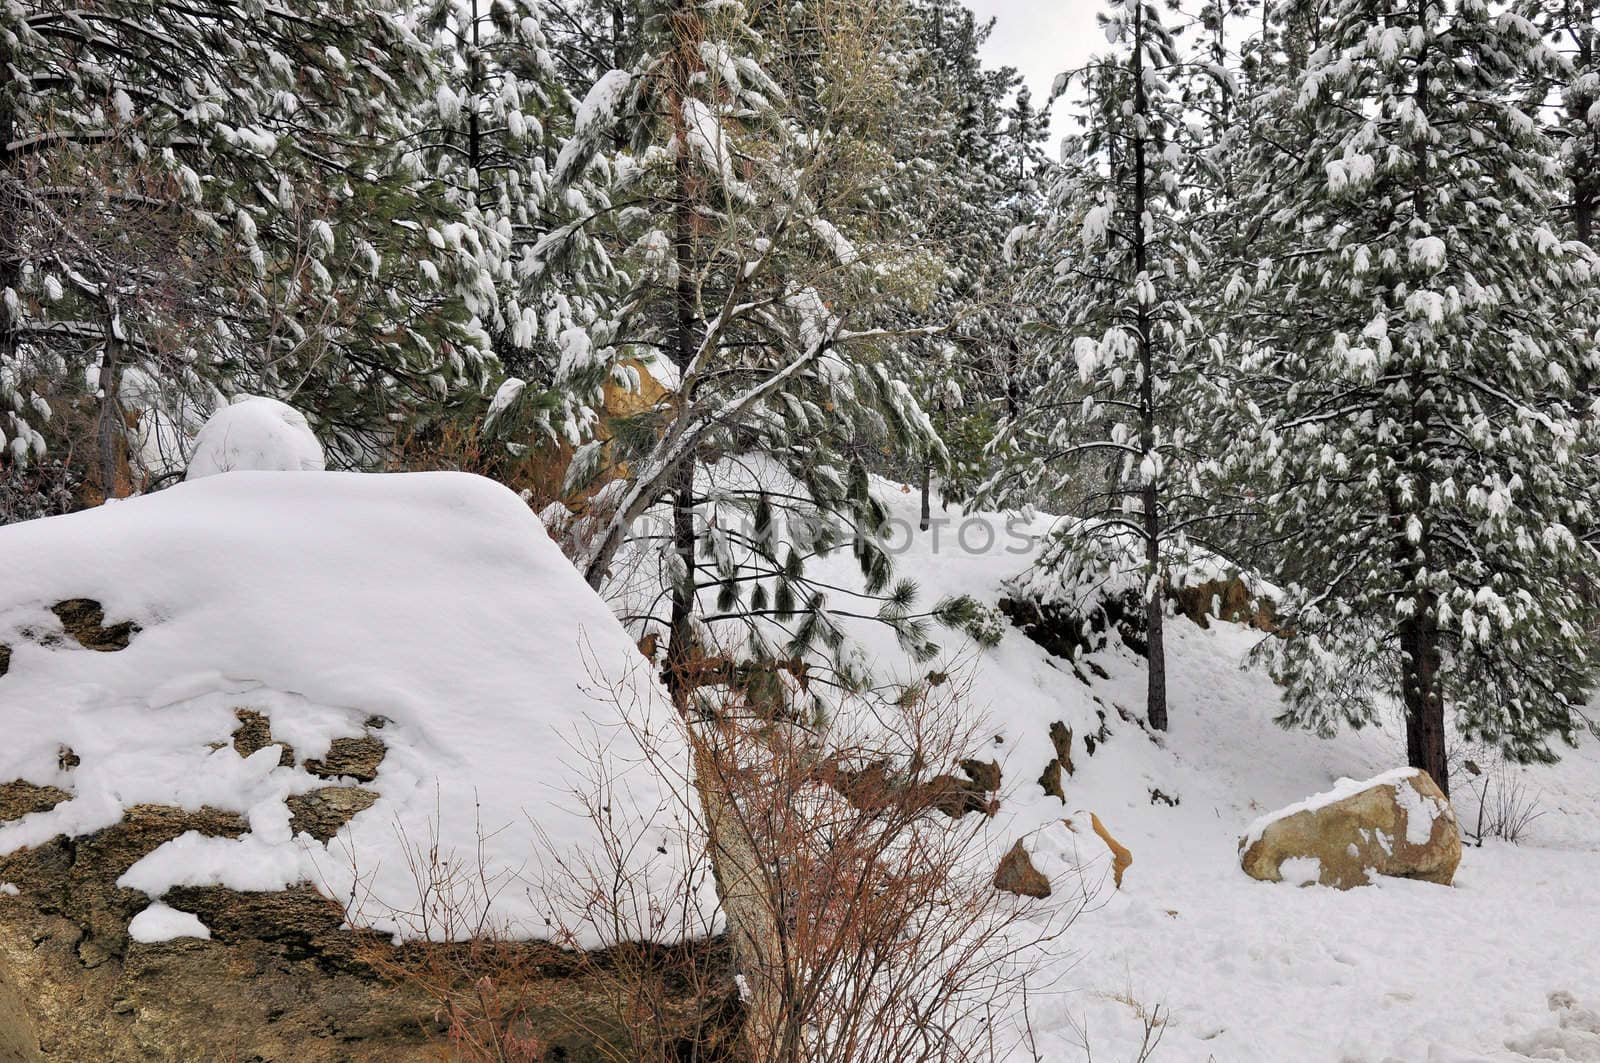 Snow covers the forest on Mount San Jacinto in Southern California.